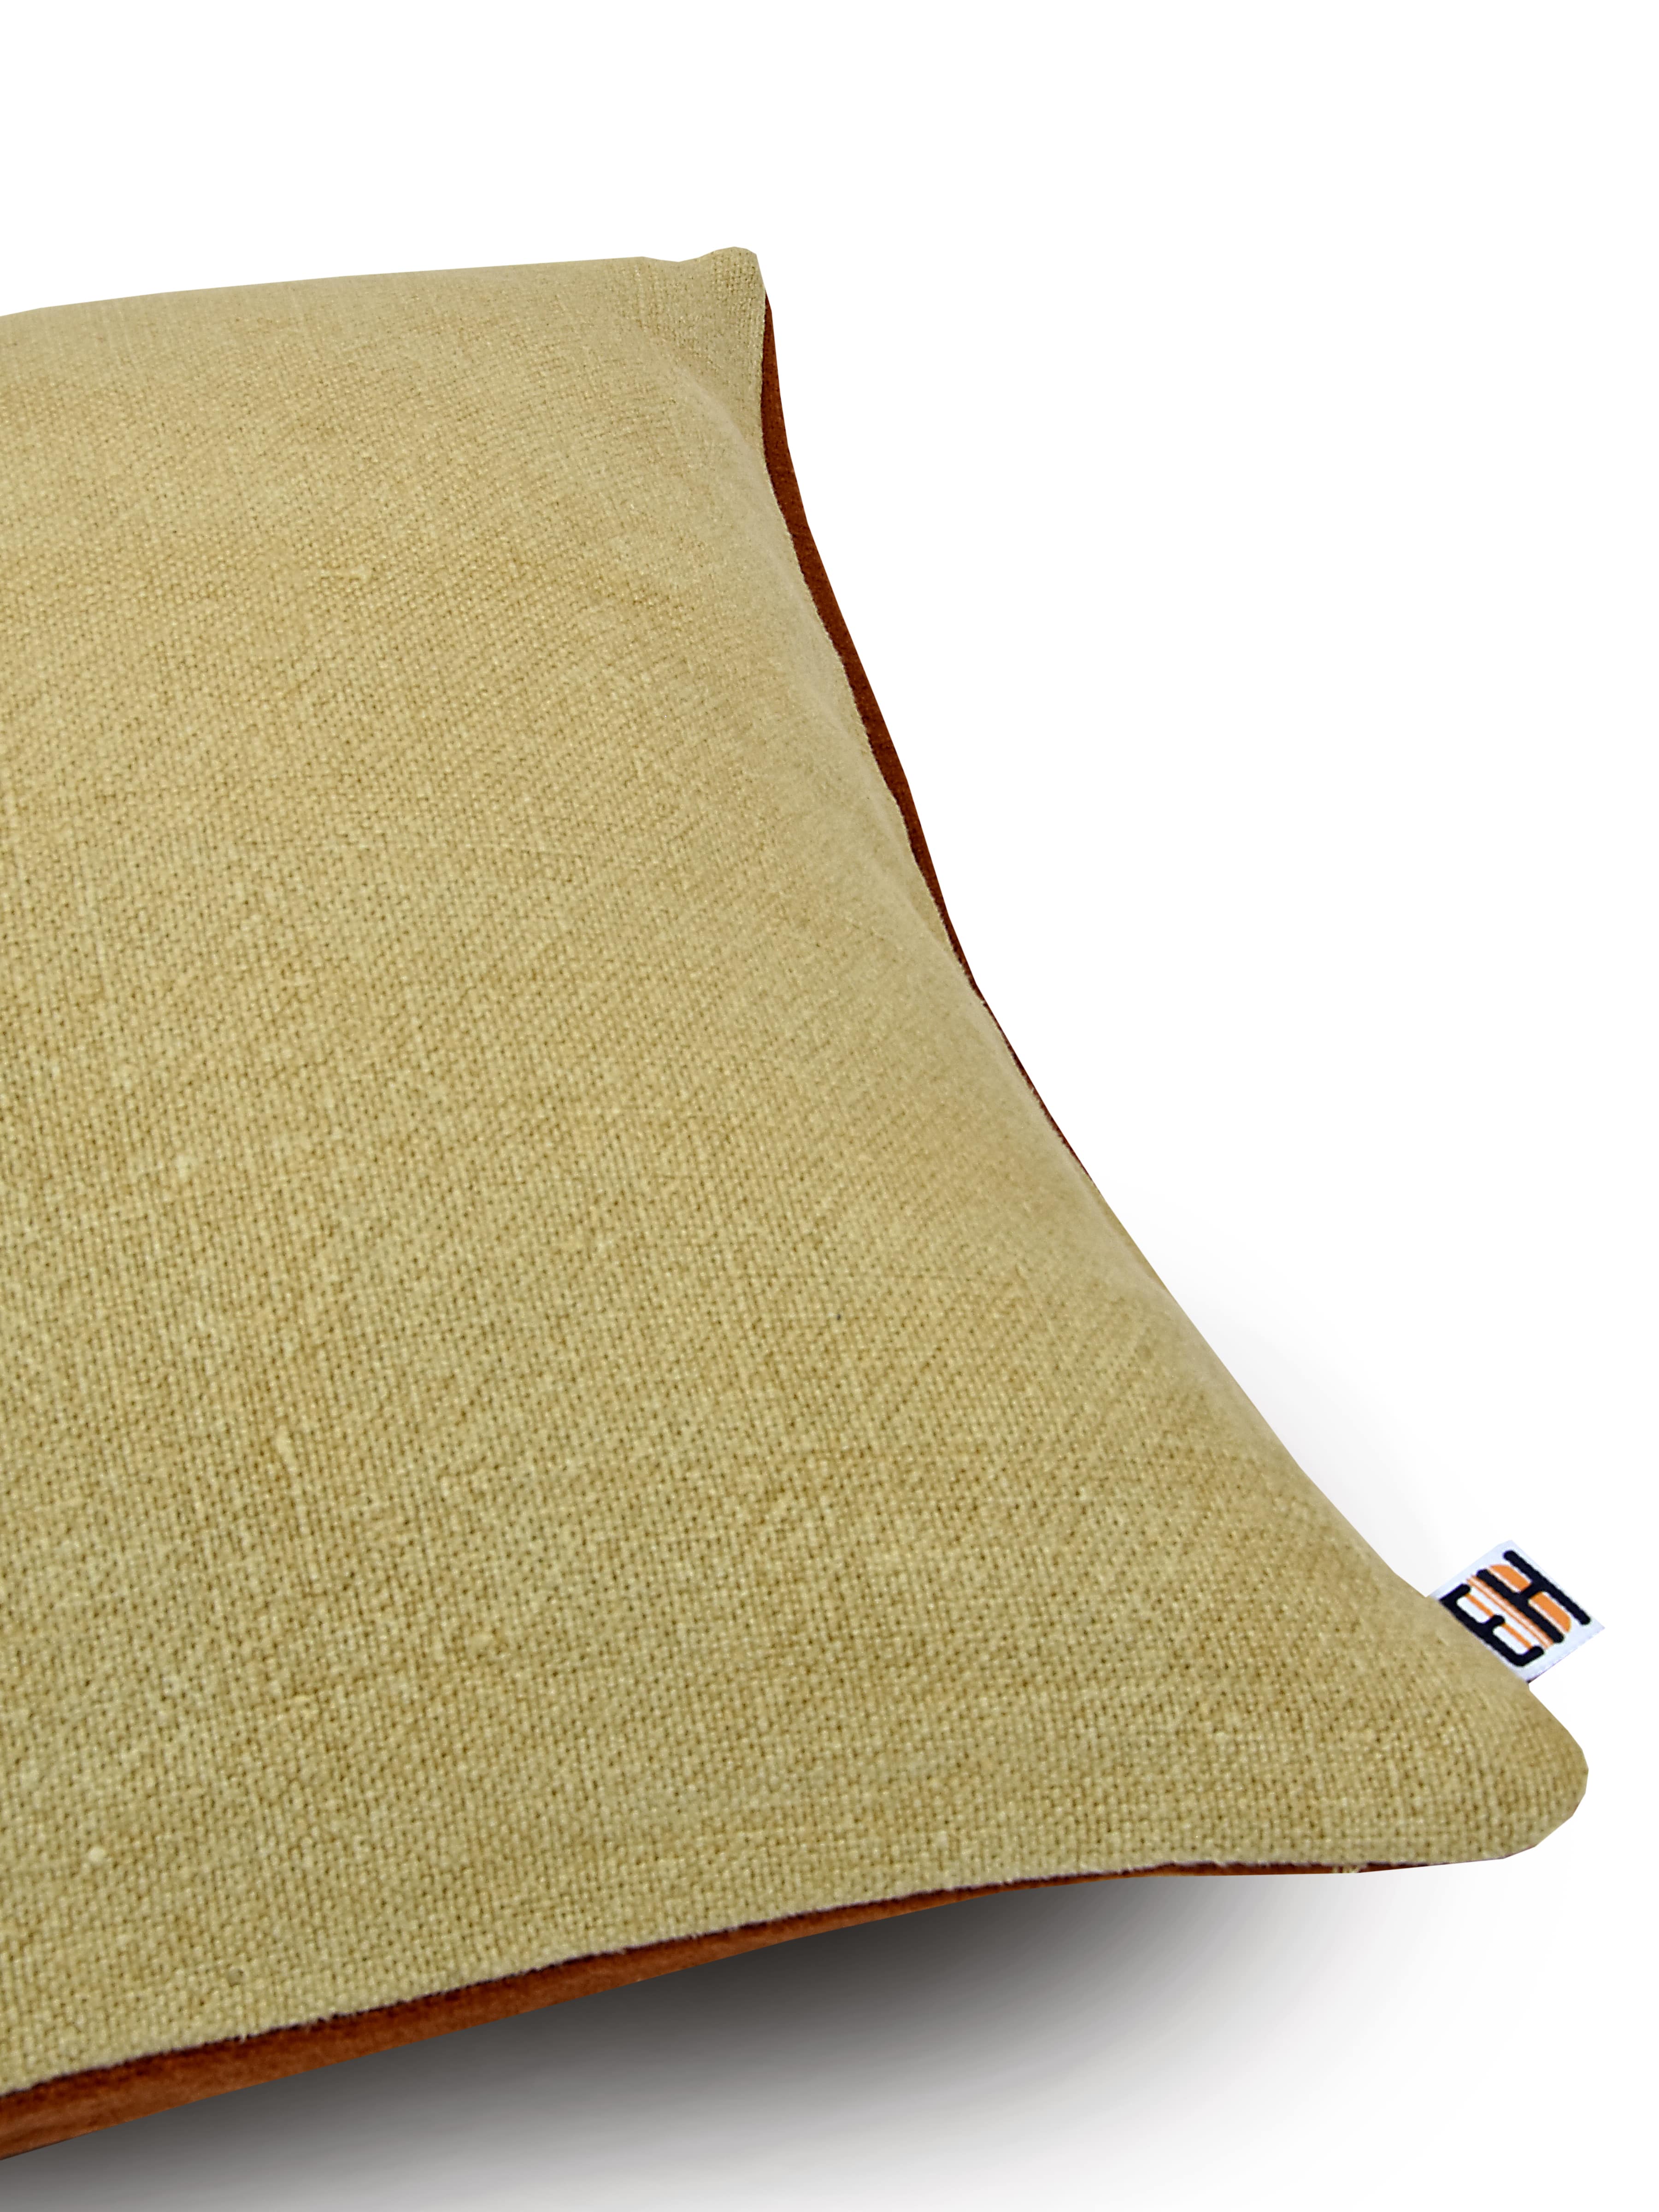 Beige and Brown Hemp Tree Hand Embroidered Cushion Cover